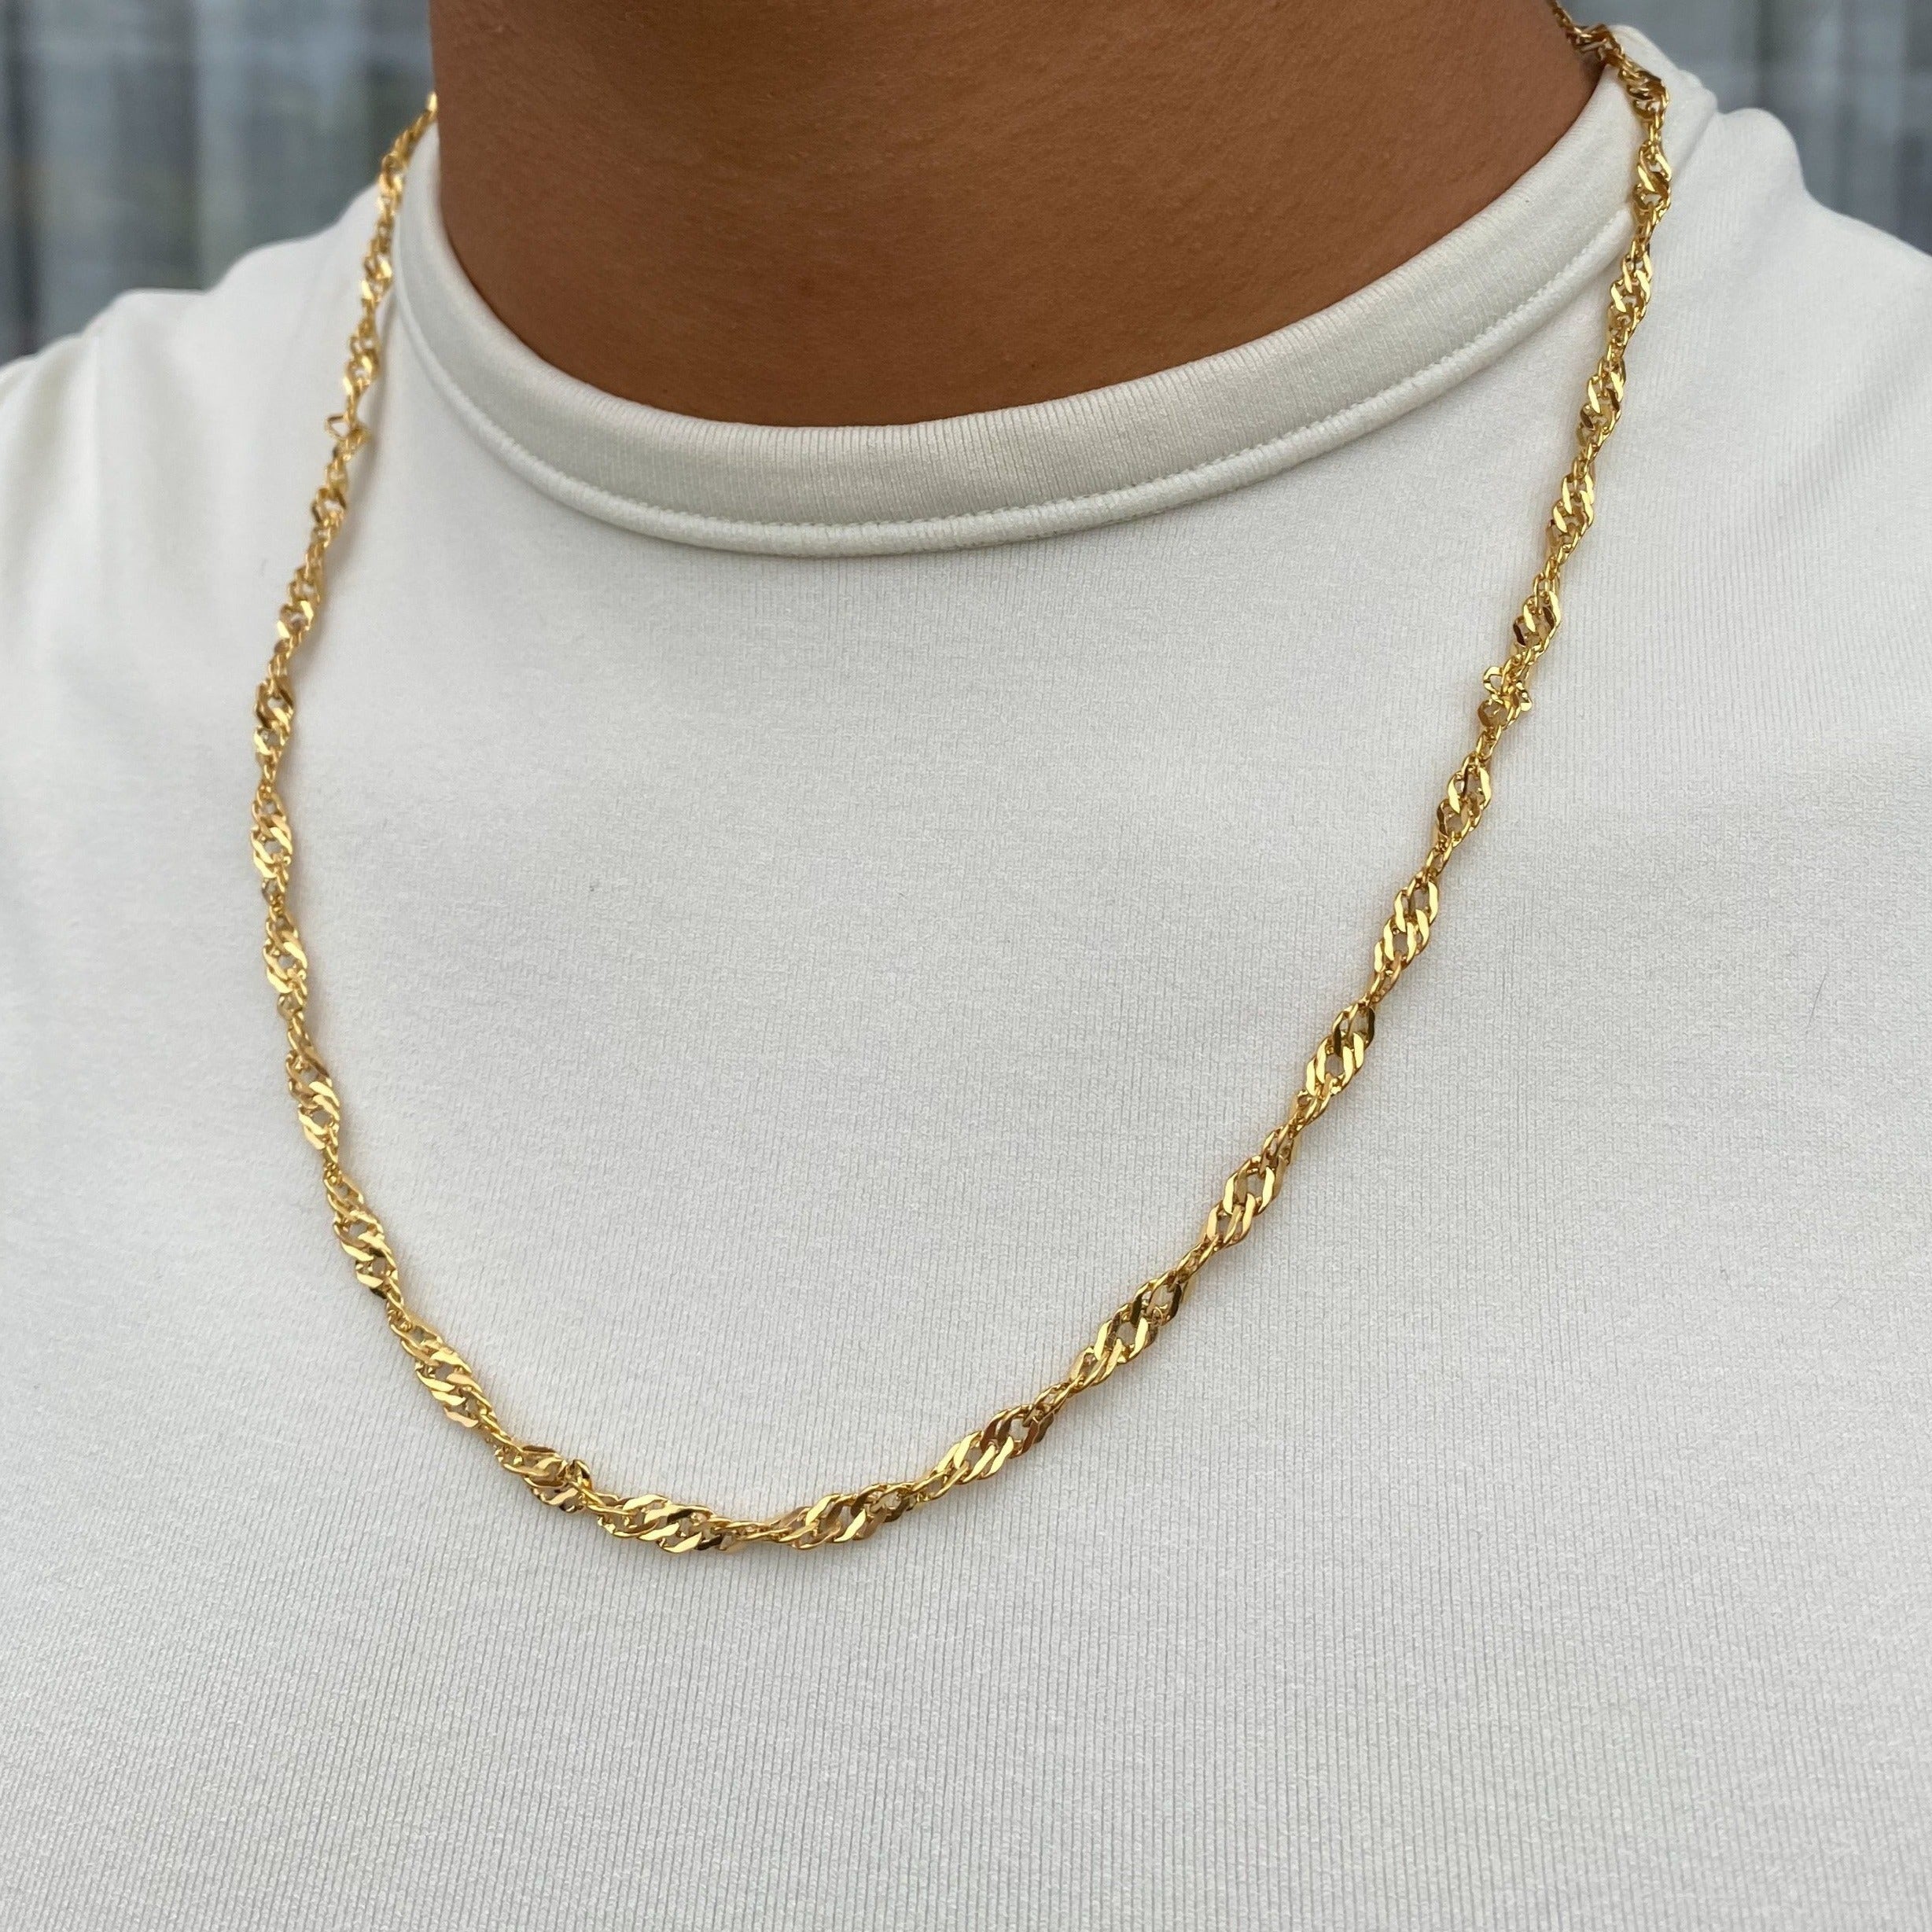 The Wavey Chain